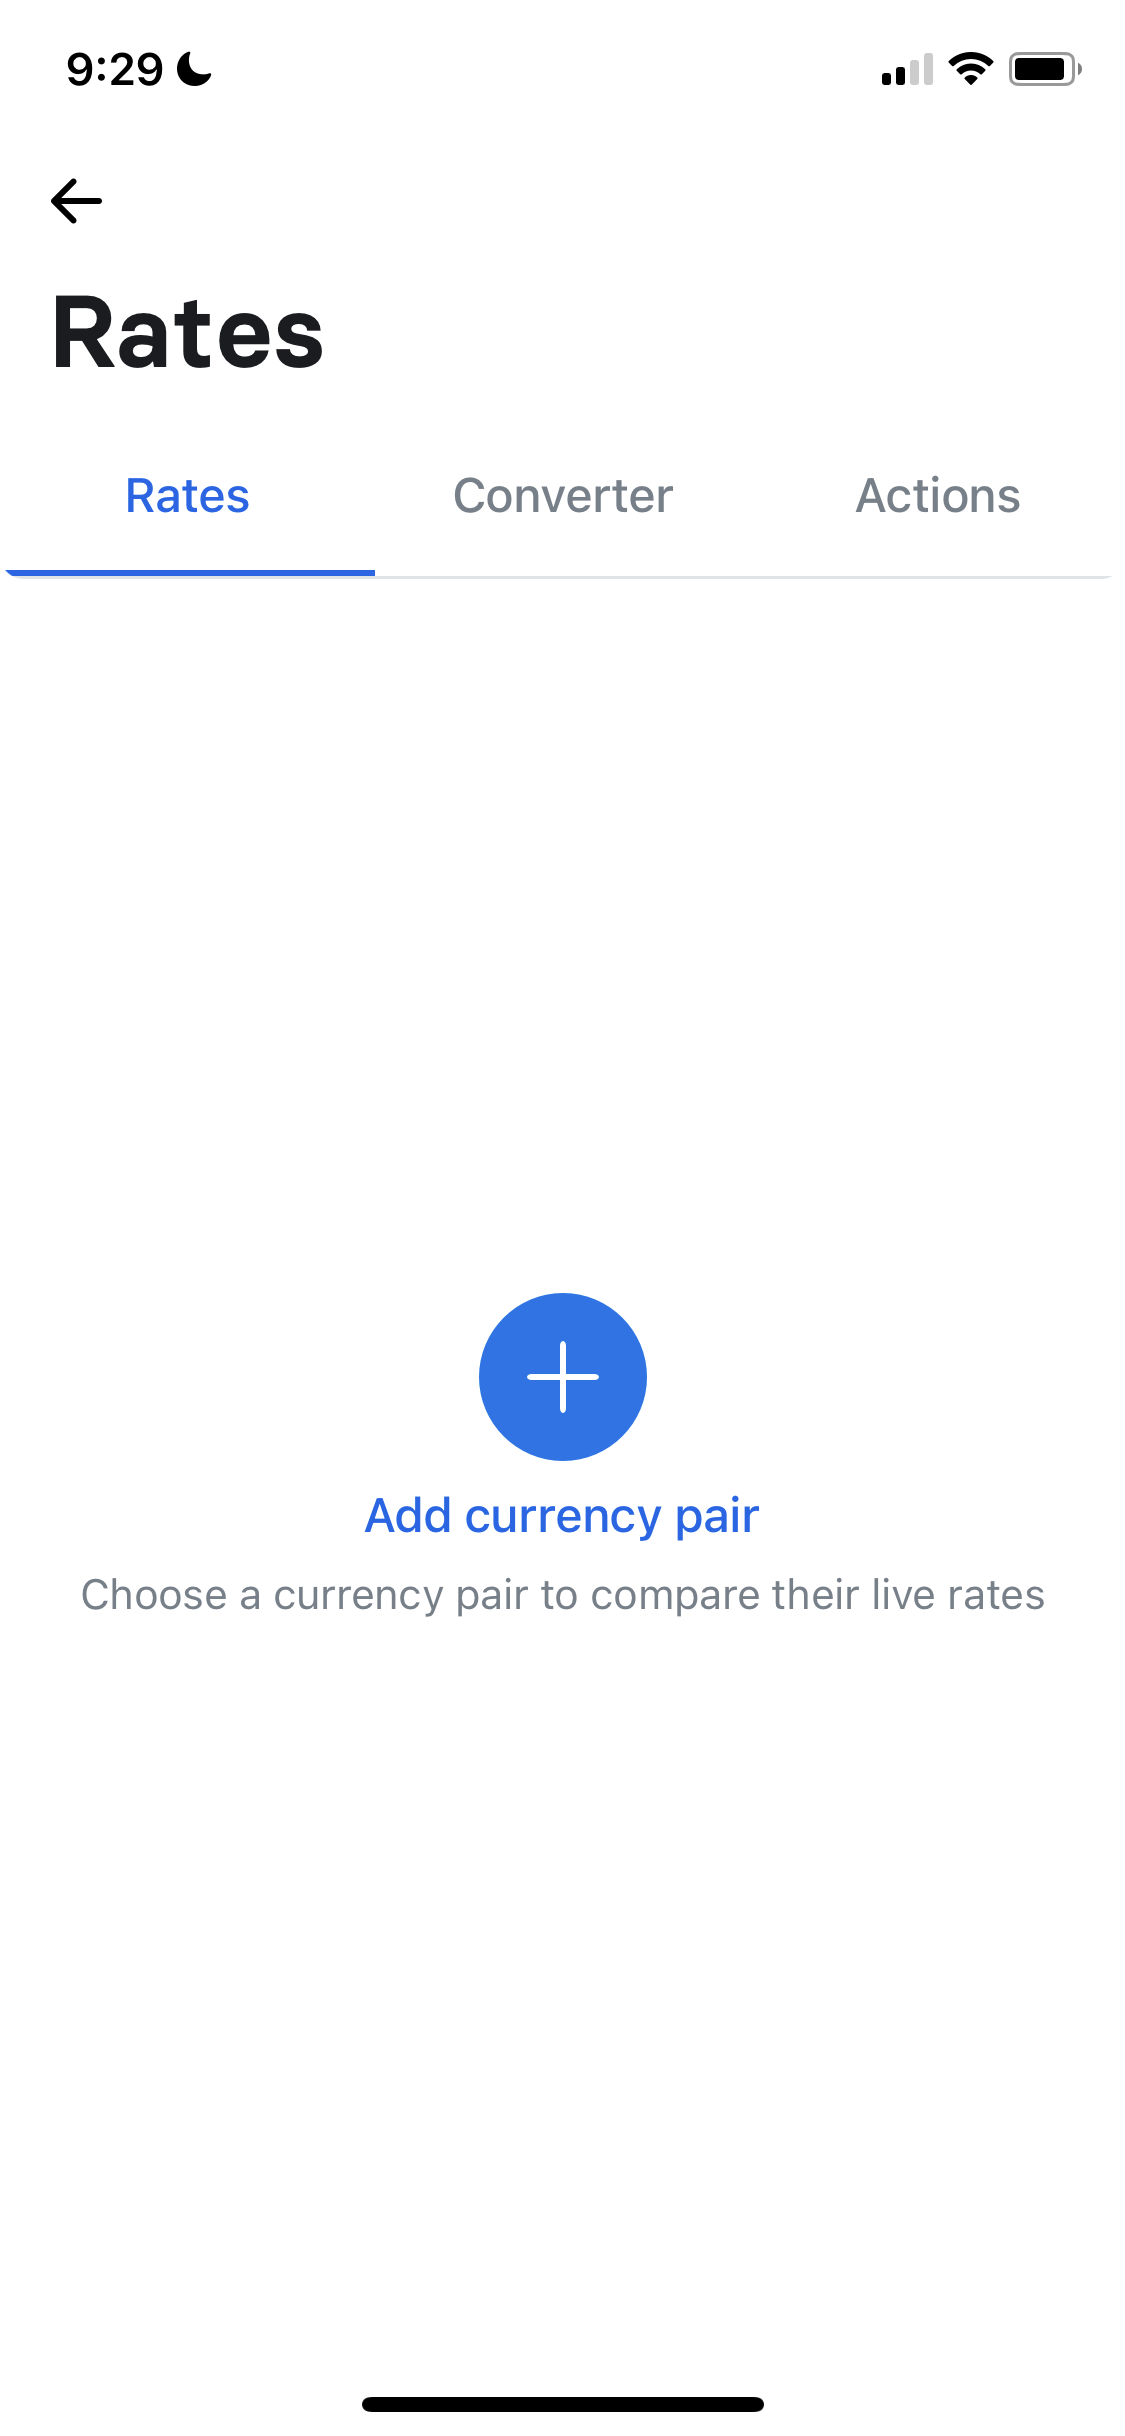 Converting currency on Revolut Business video screenshot